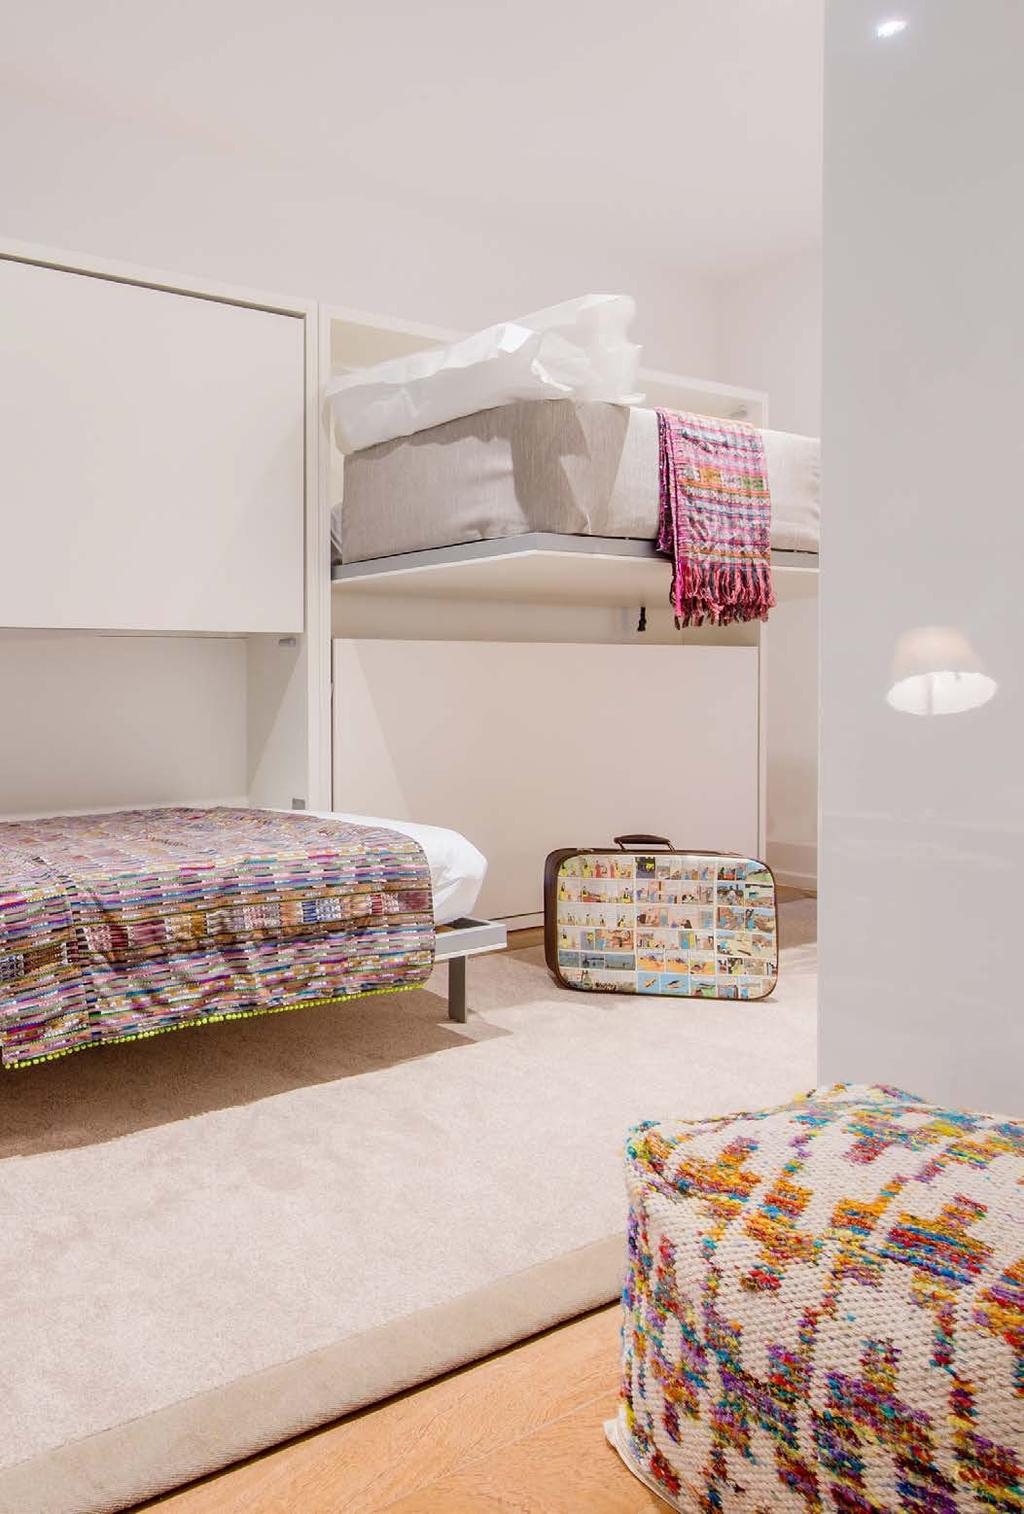 SUPERIOR DELUXE STUDIO with bunkbed In addition to the double bed, the 2 Superior Deluxe Studios offer a stylish bunkbed for children as well as an open